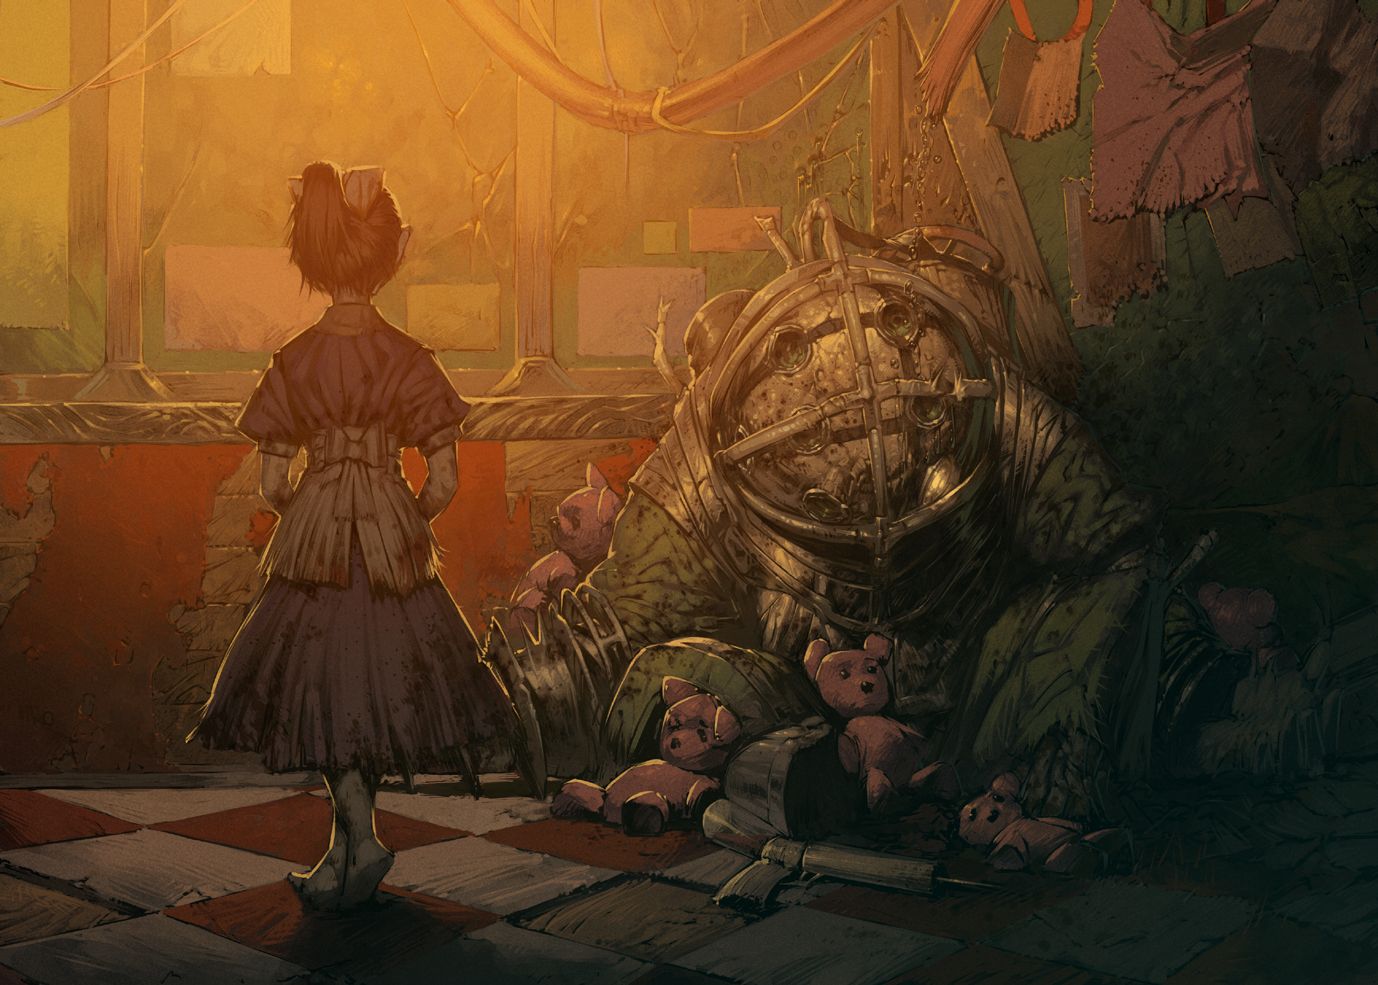 BioShock fan art of a Little Sister and her Big Daddy.